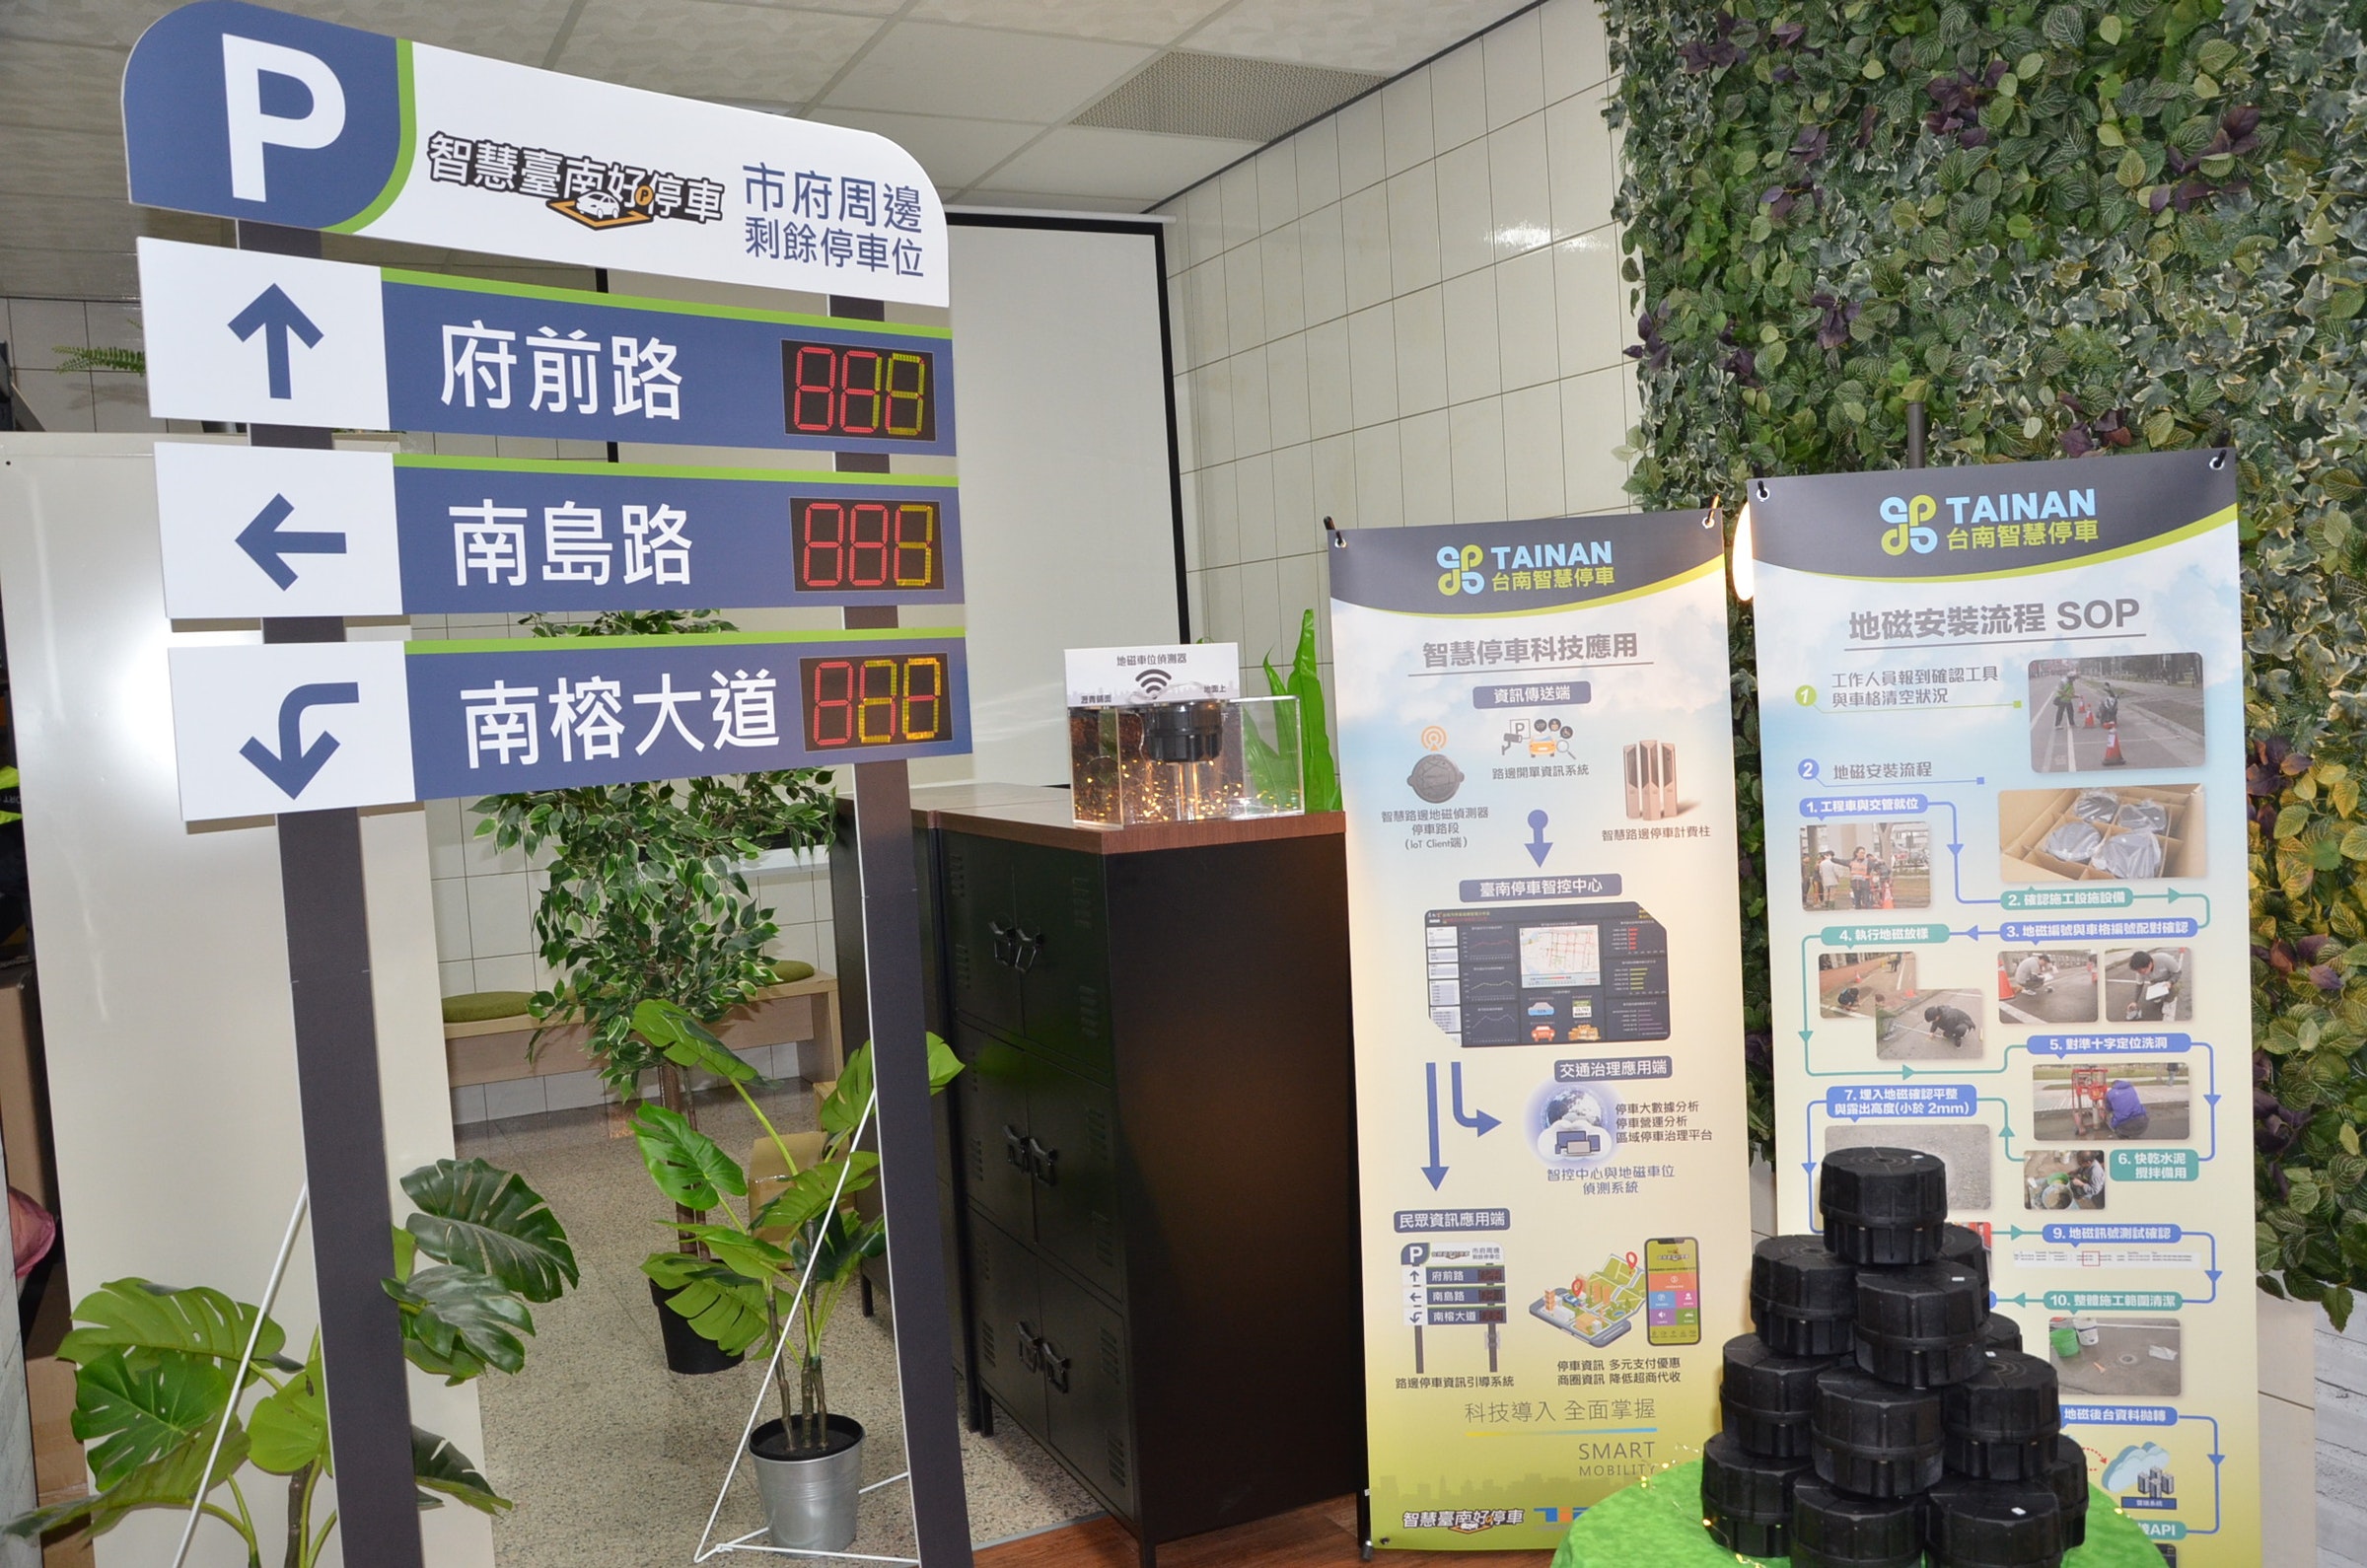 Tainan City Government Yonghua Civic Center, Tainan City Government, East District, Tainan, 台南保险套情人 总店, TYO:2733, Energy, Technology, Parking, System, Earth's magnetic field, energy, Organism, Poster, Plant, Display board, Building, Tourism